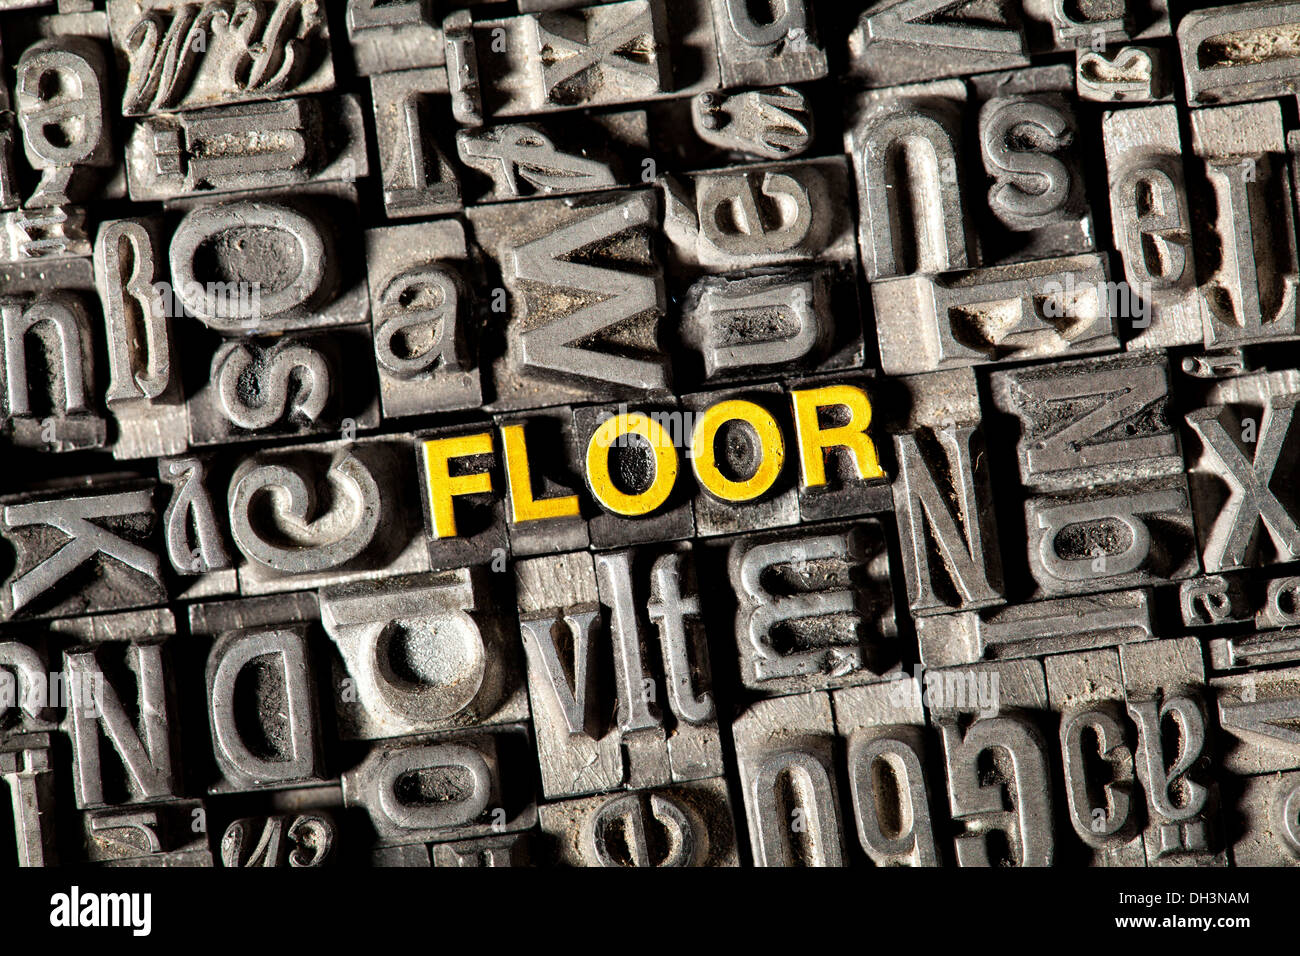 Old lead letters forming the word FLOOR Stock Photo